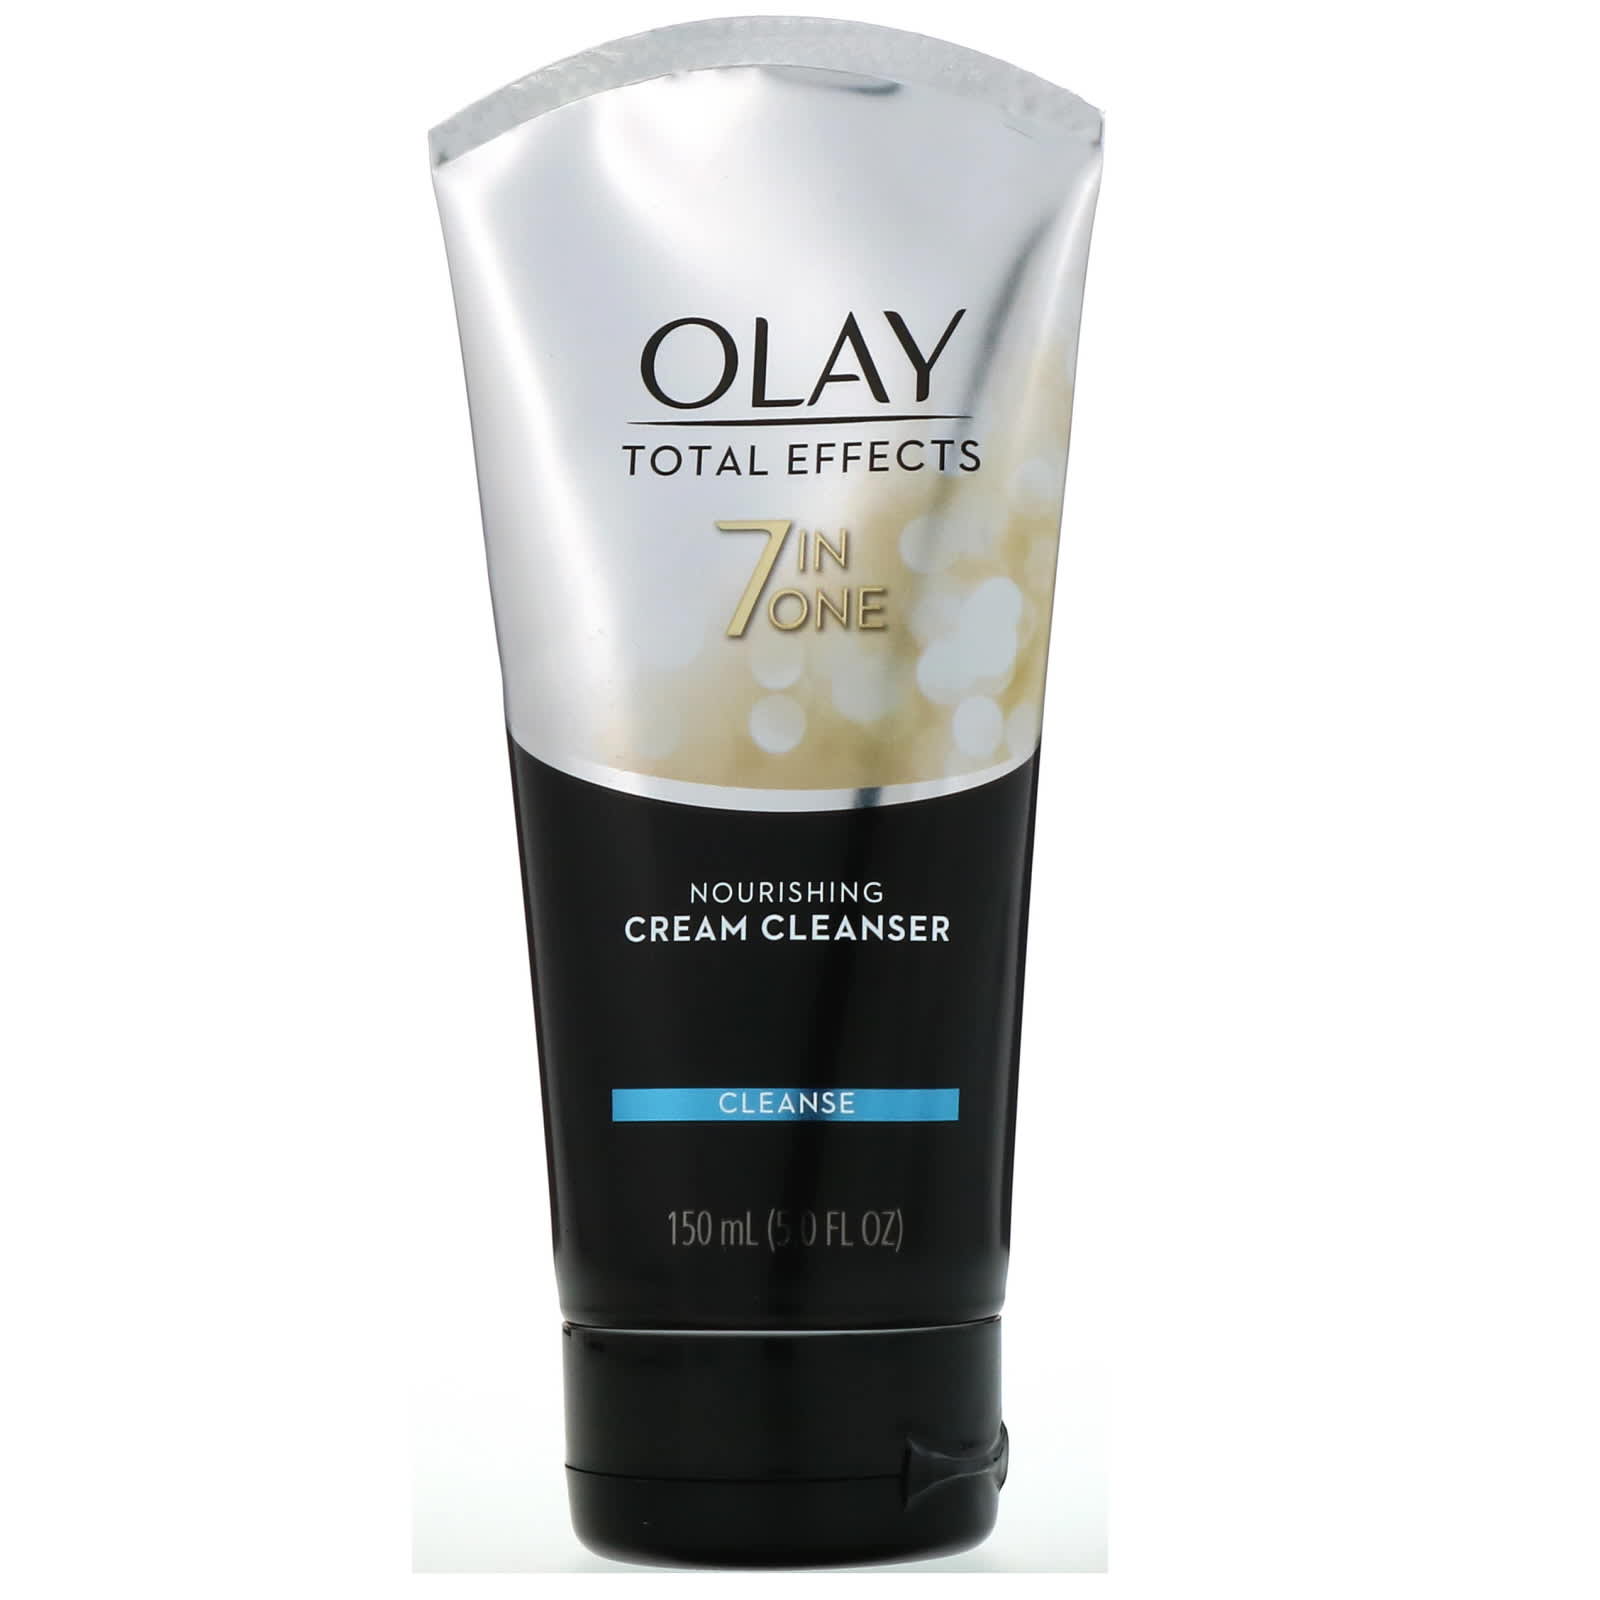 Olay, Total Effects, 7-in-One Nourishing Cream Cleanser (150 ml)